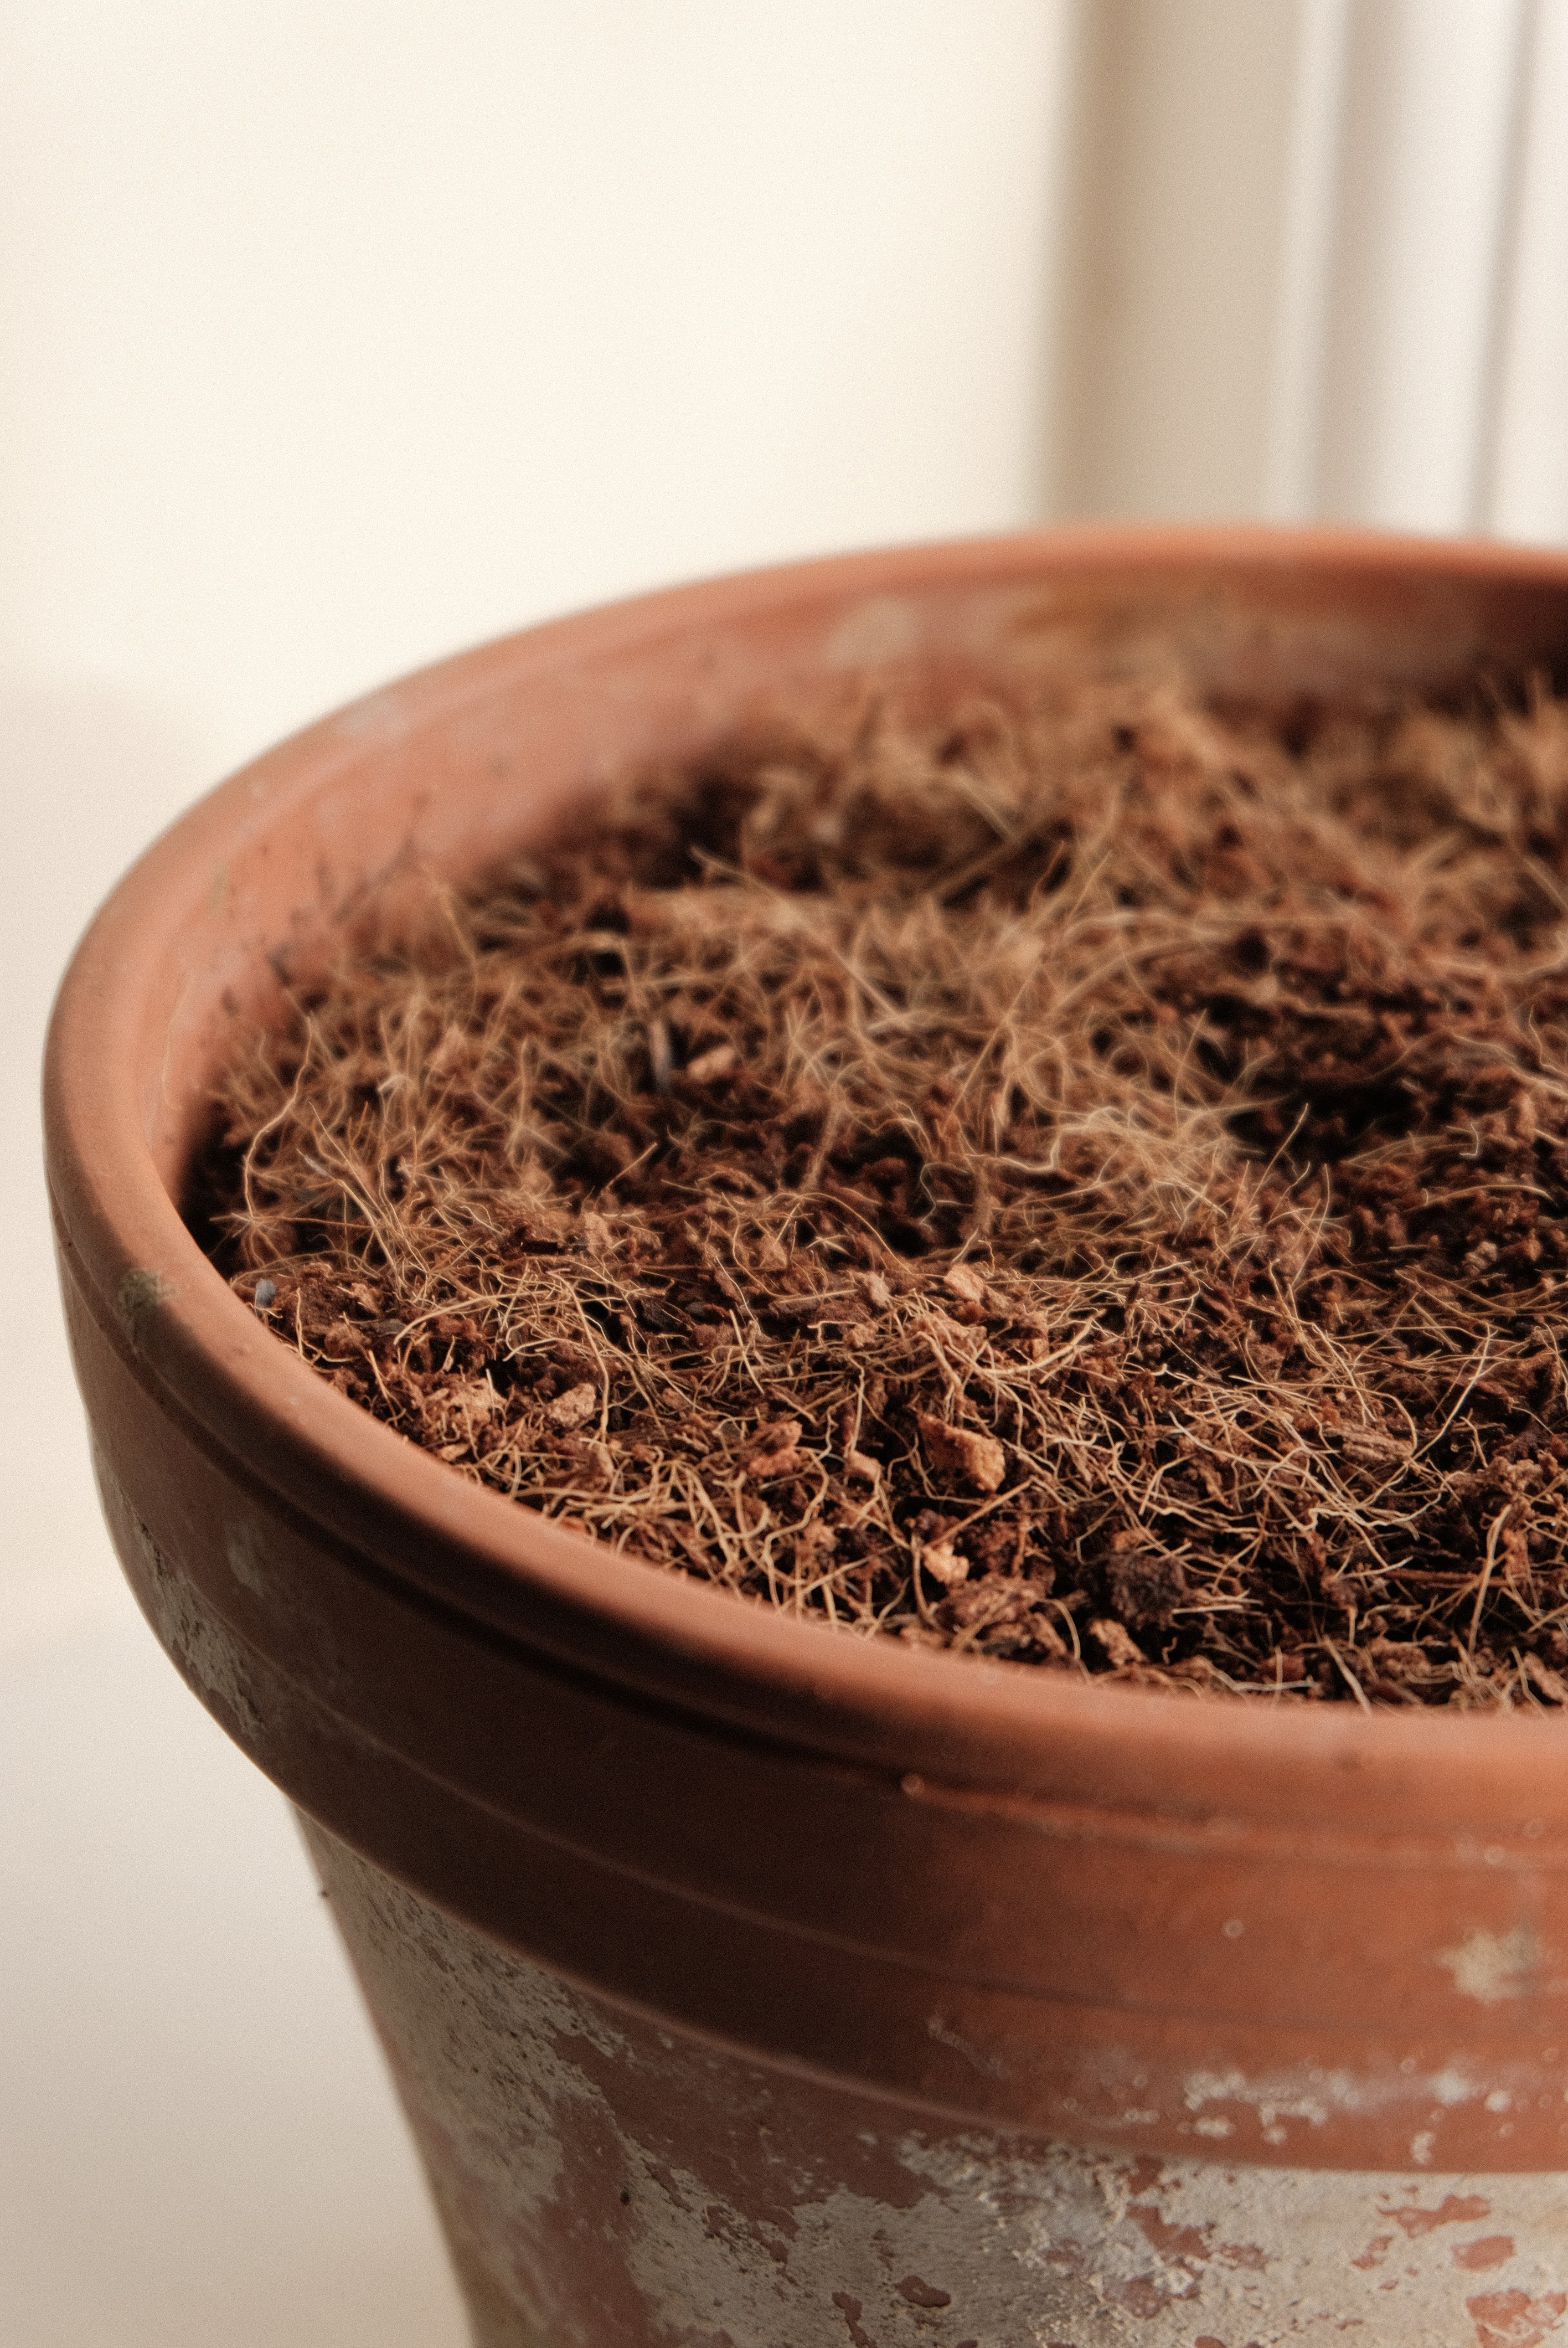 Is coir compost good for seeds?